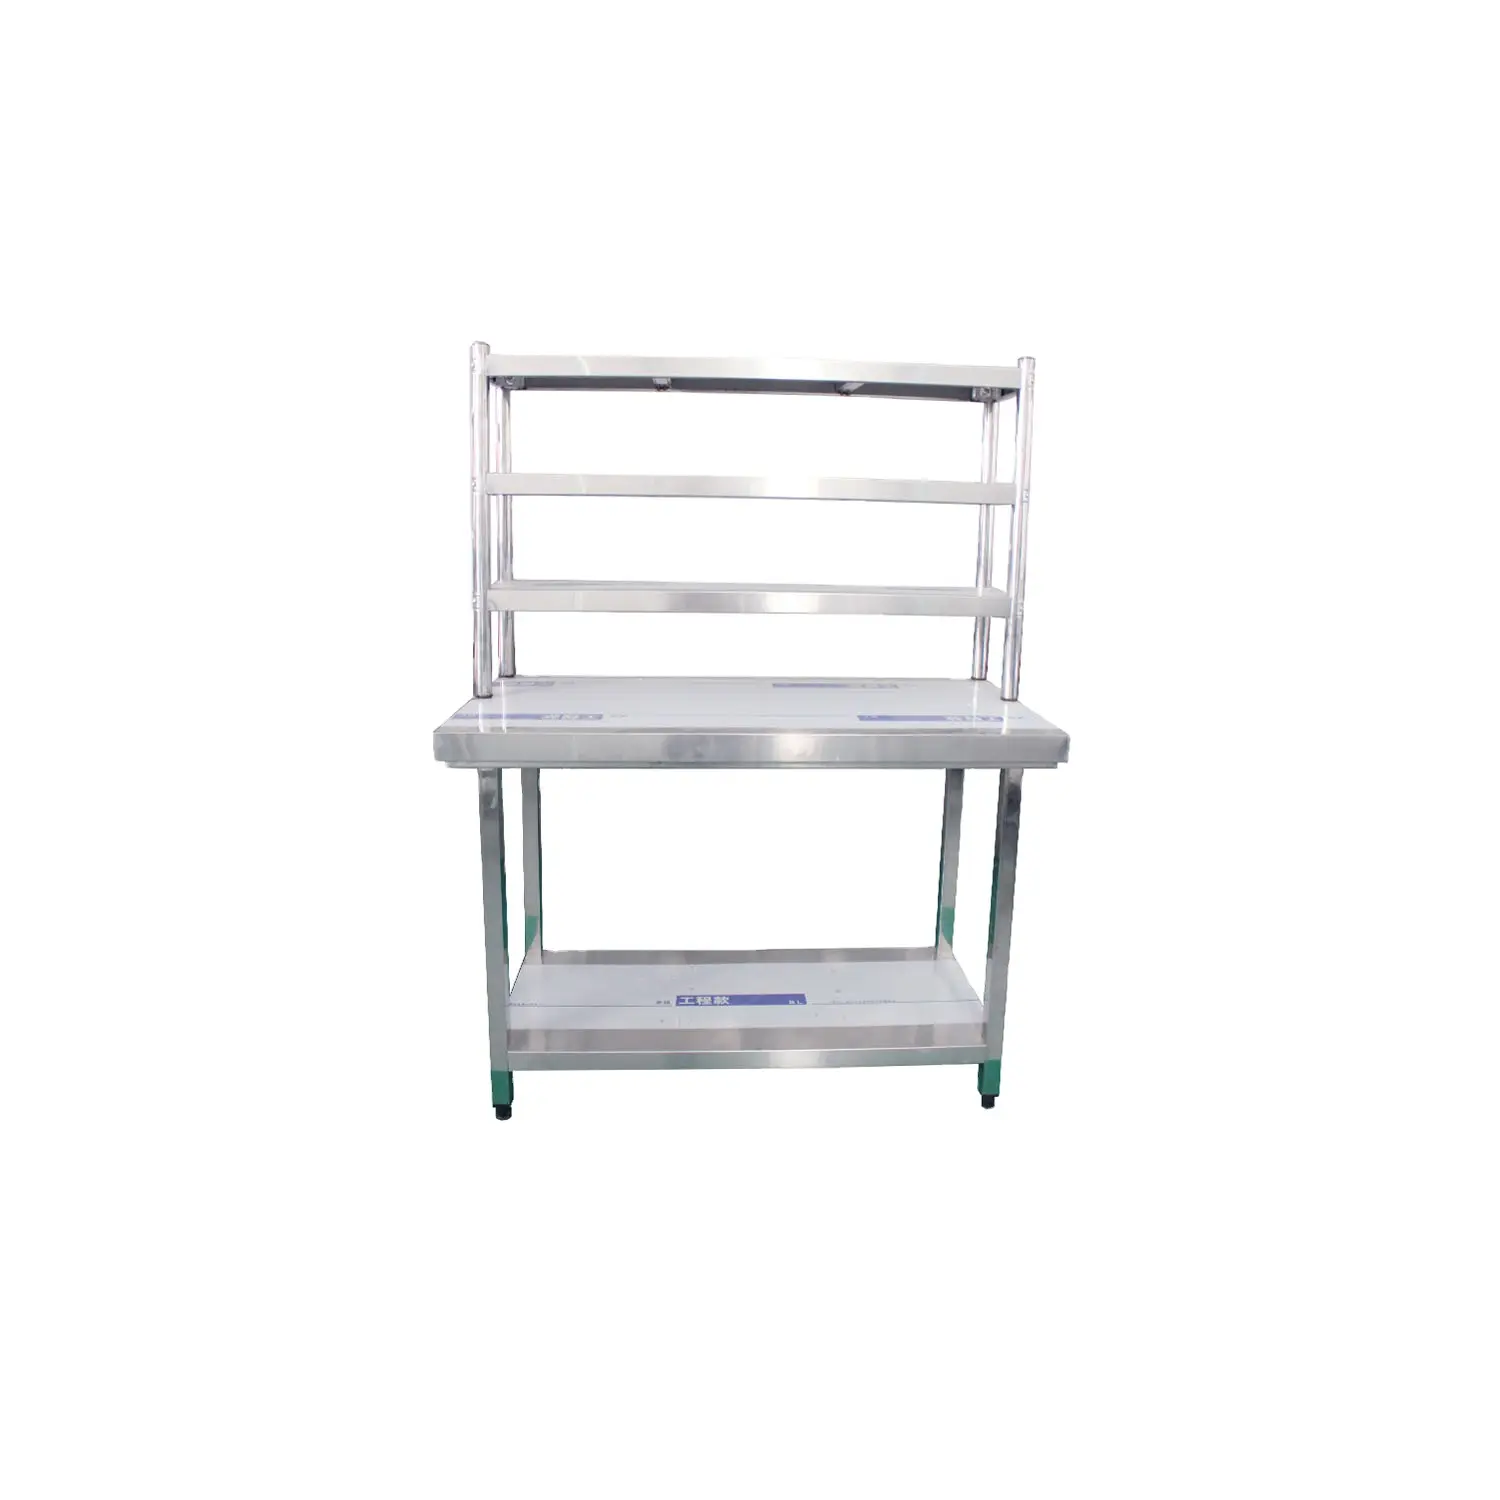 Stainless steel worktable with three level countertop stand shelf